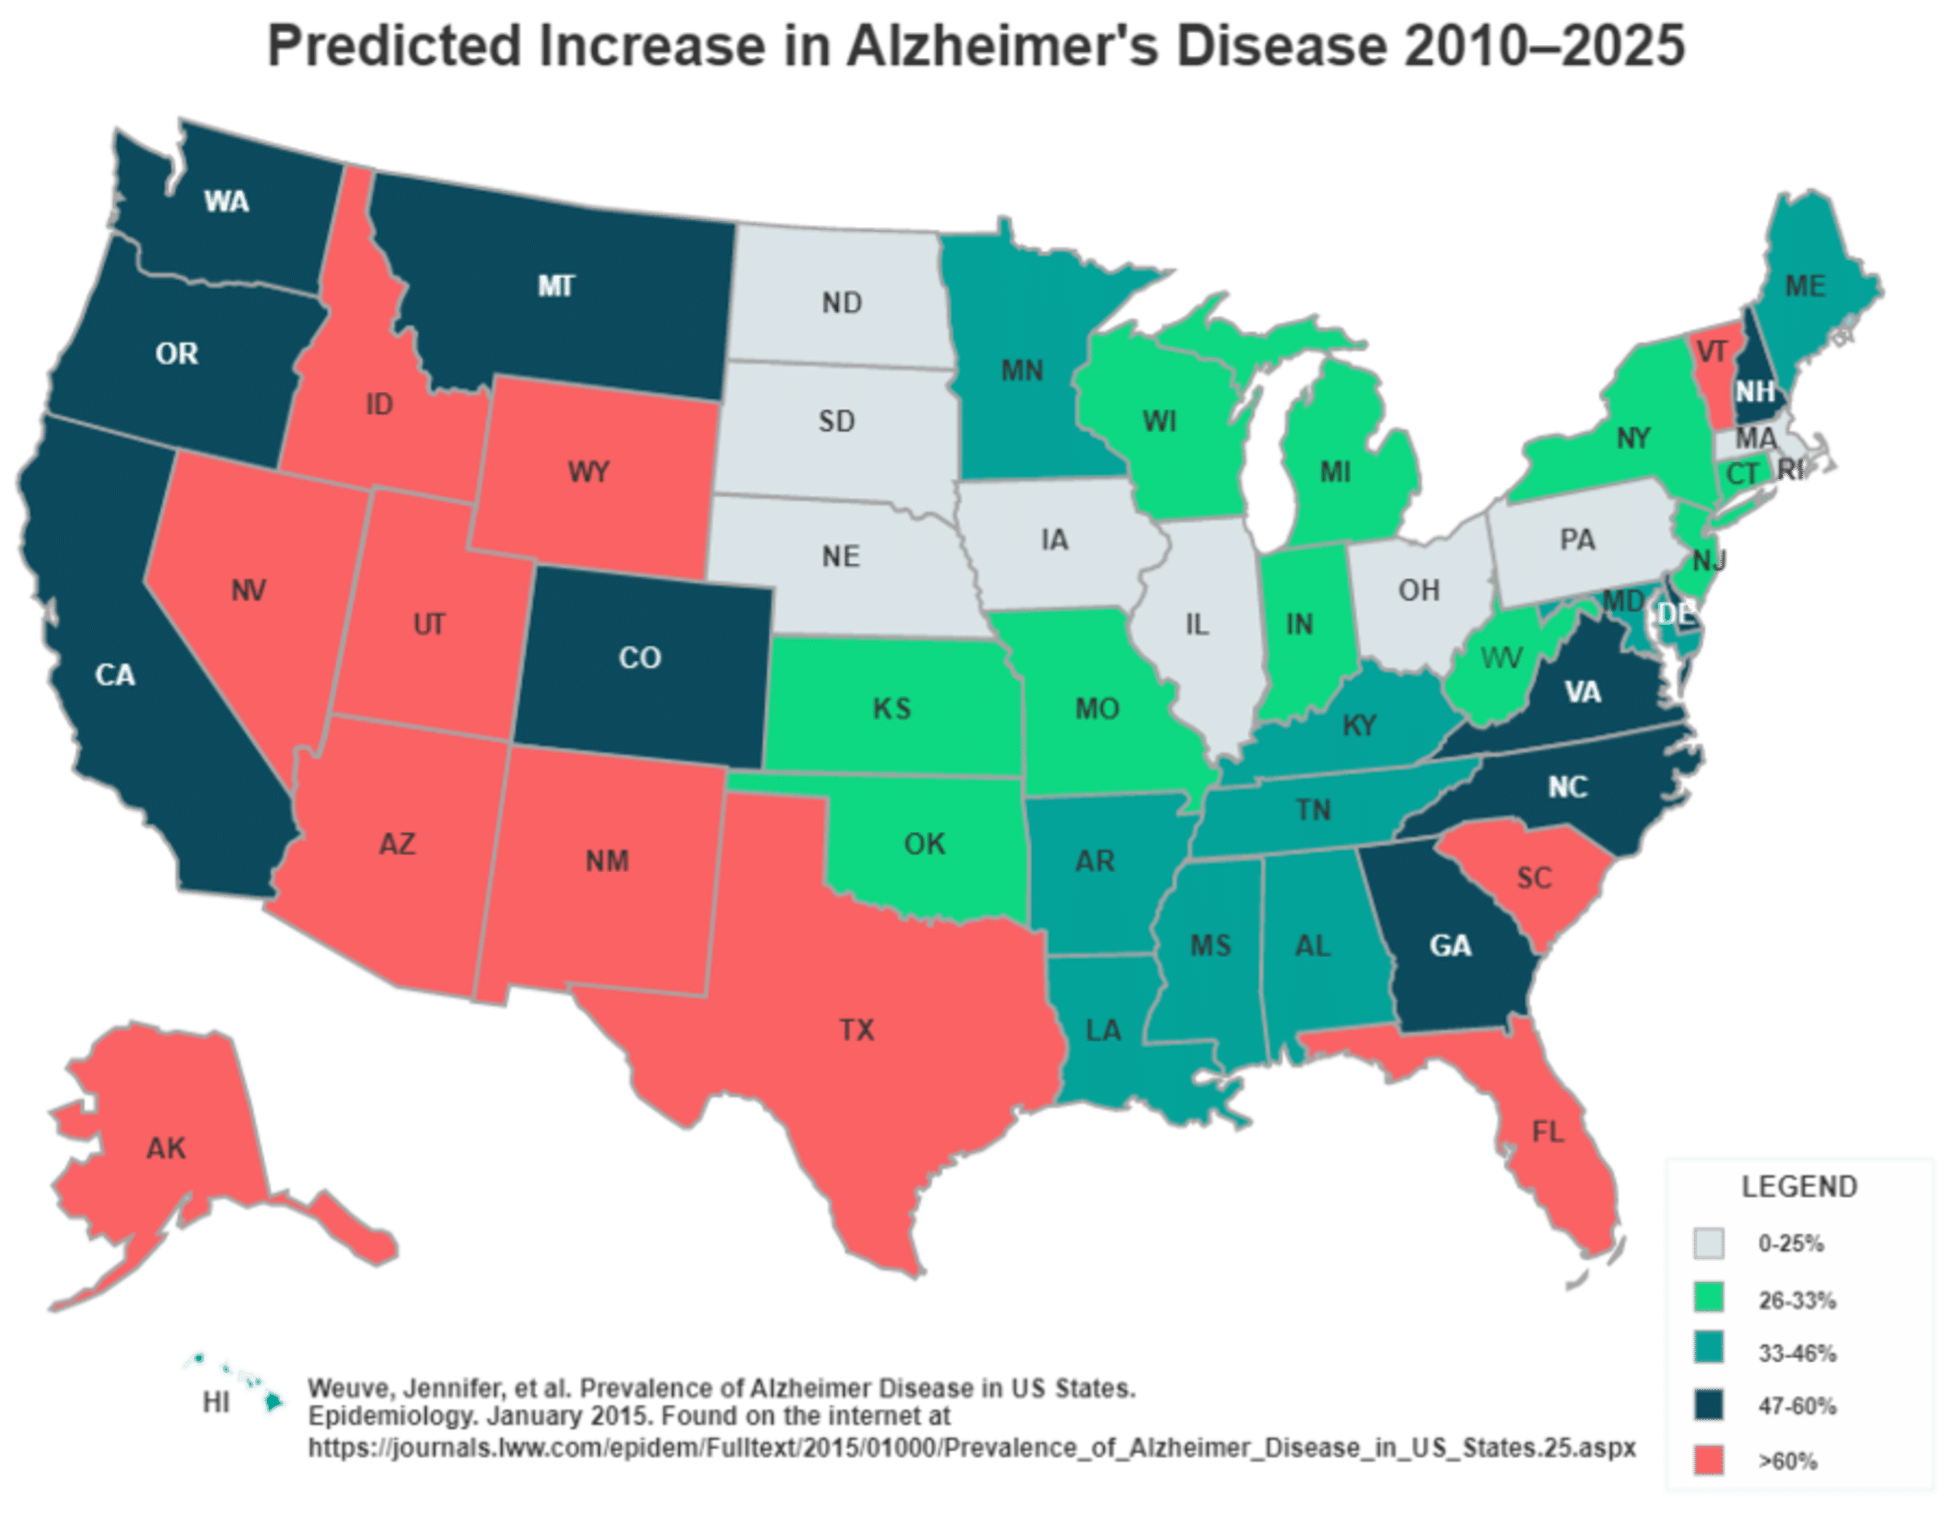 U.S. map showing predicted increase in rates of Alzheimer's disease